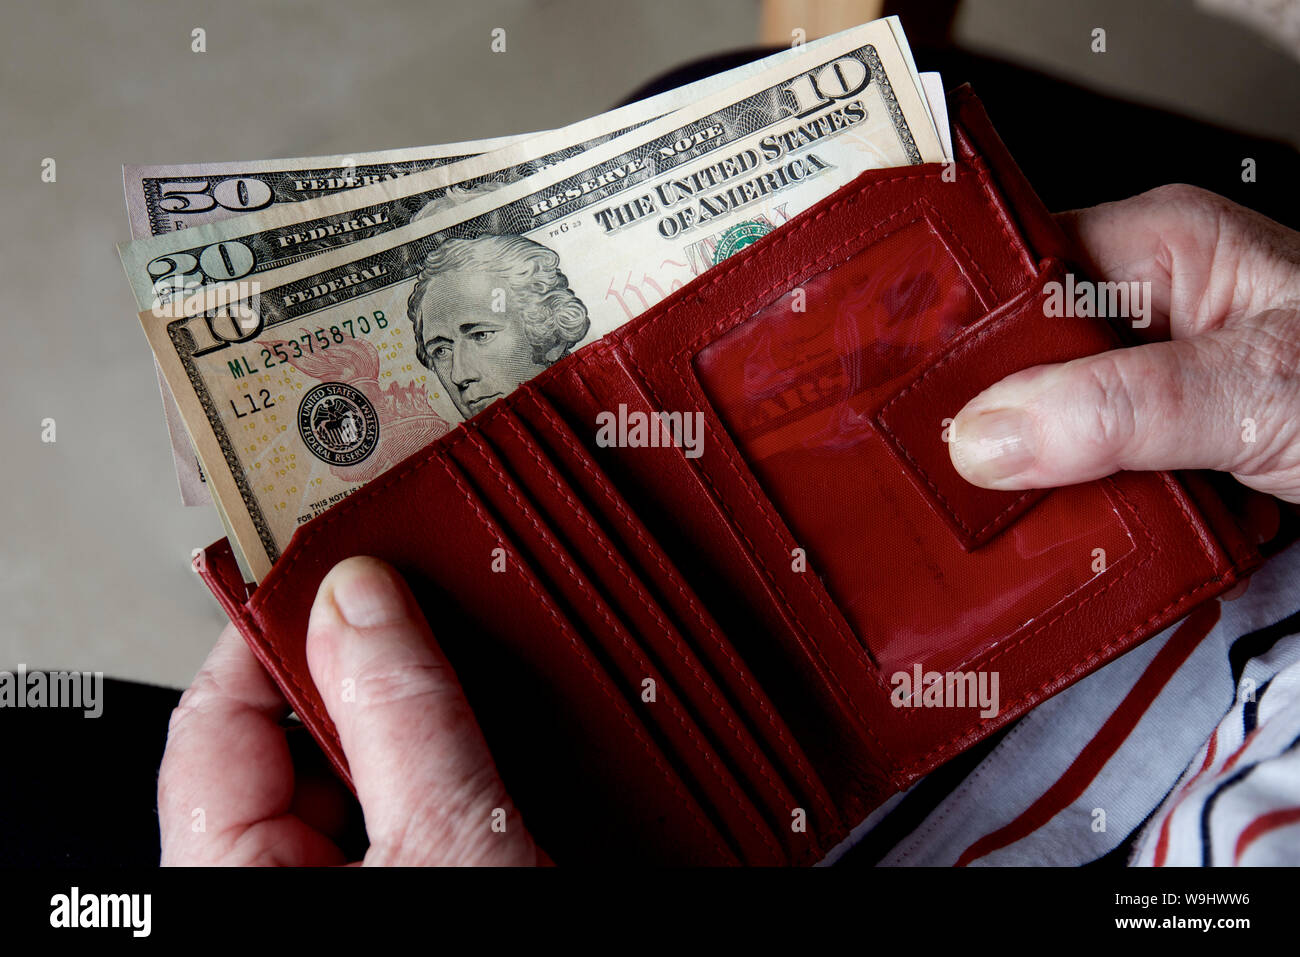 Woman spending American dollars from a red purse. Stock Photo